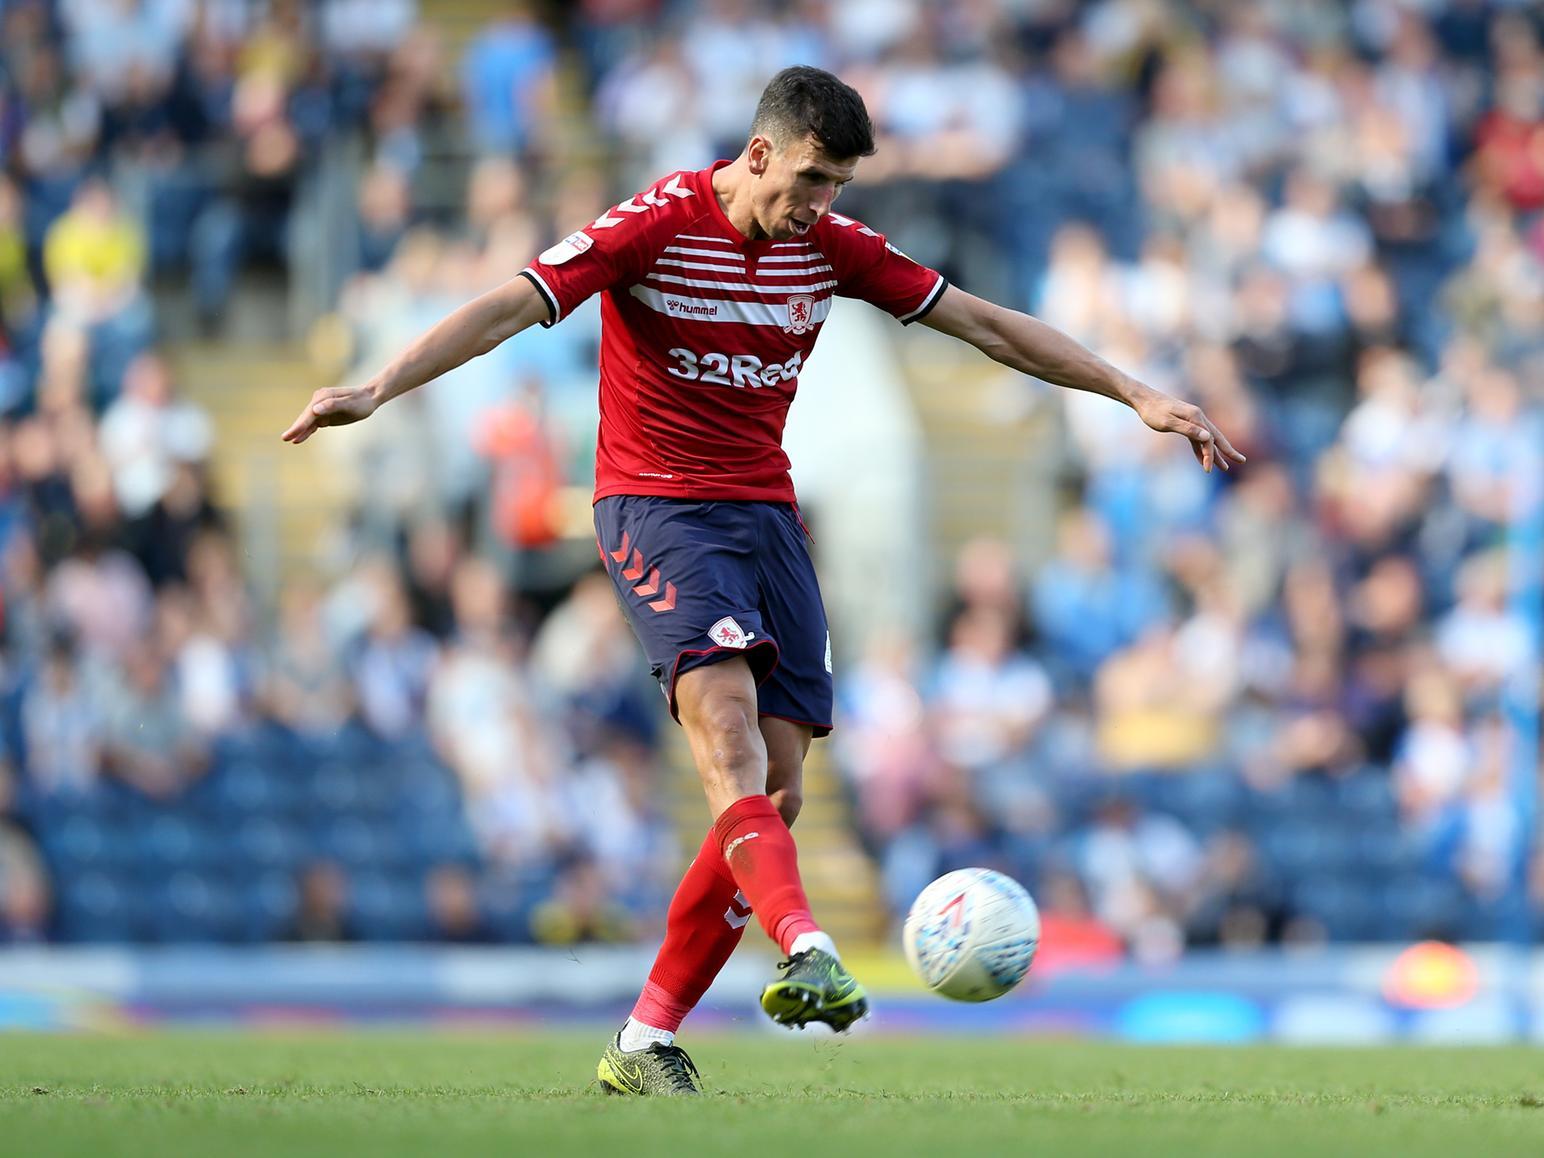 Leeds United are said to be battling with the likes of Fulham and Stoke City to sign Middlesbrough defender Daniel Ayala. The ex-Liverpool man's contract expires next summer. (Team Talk)